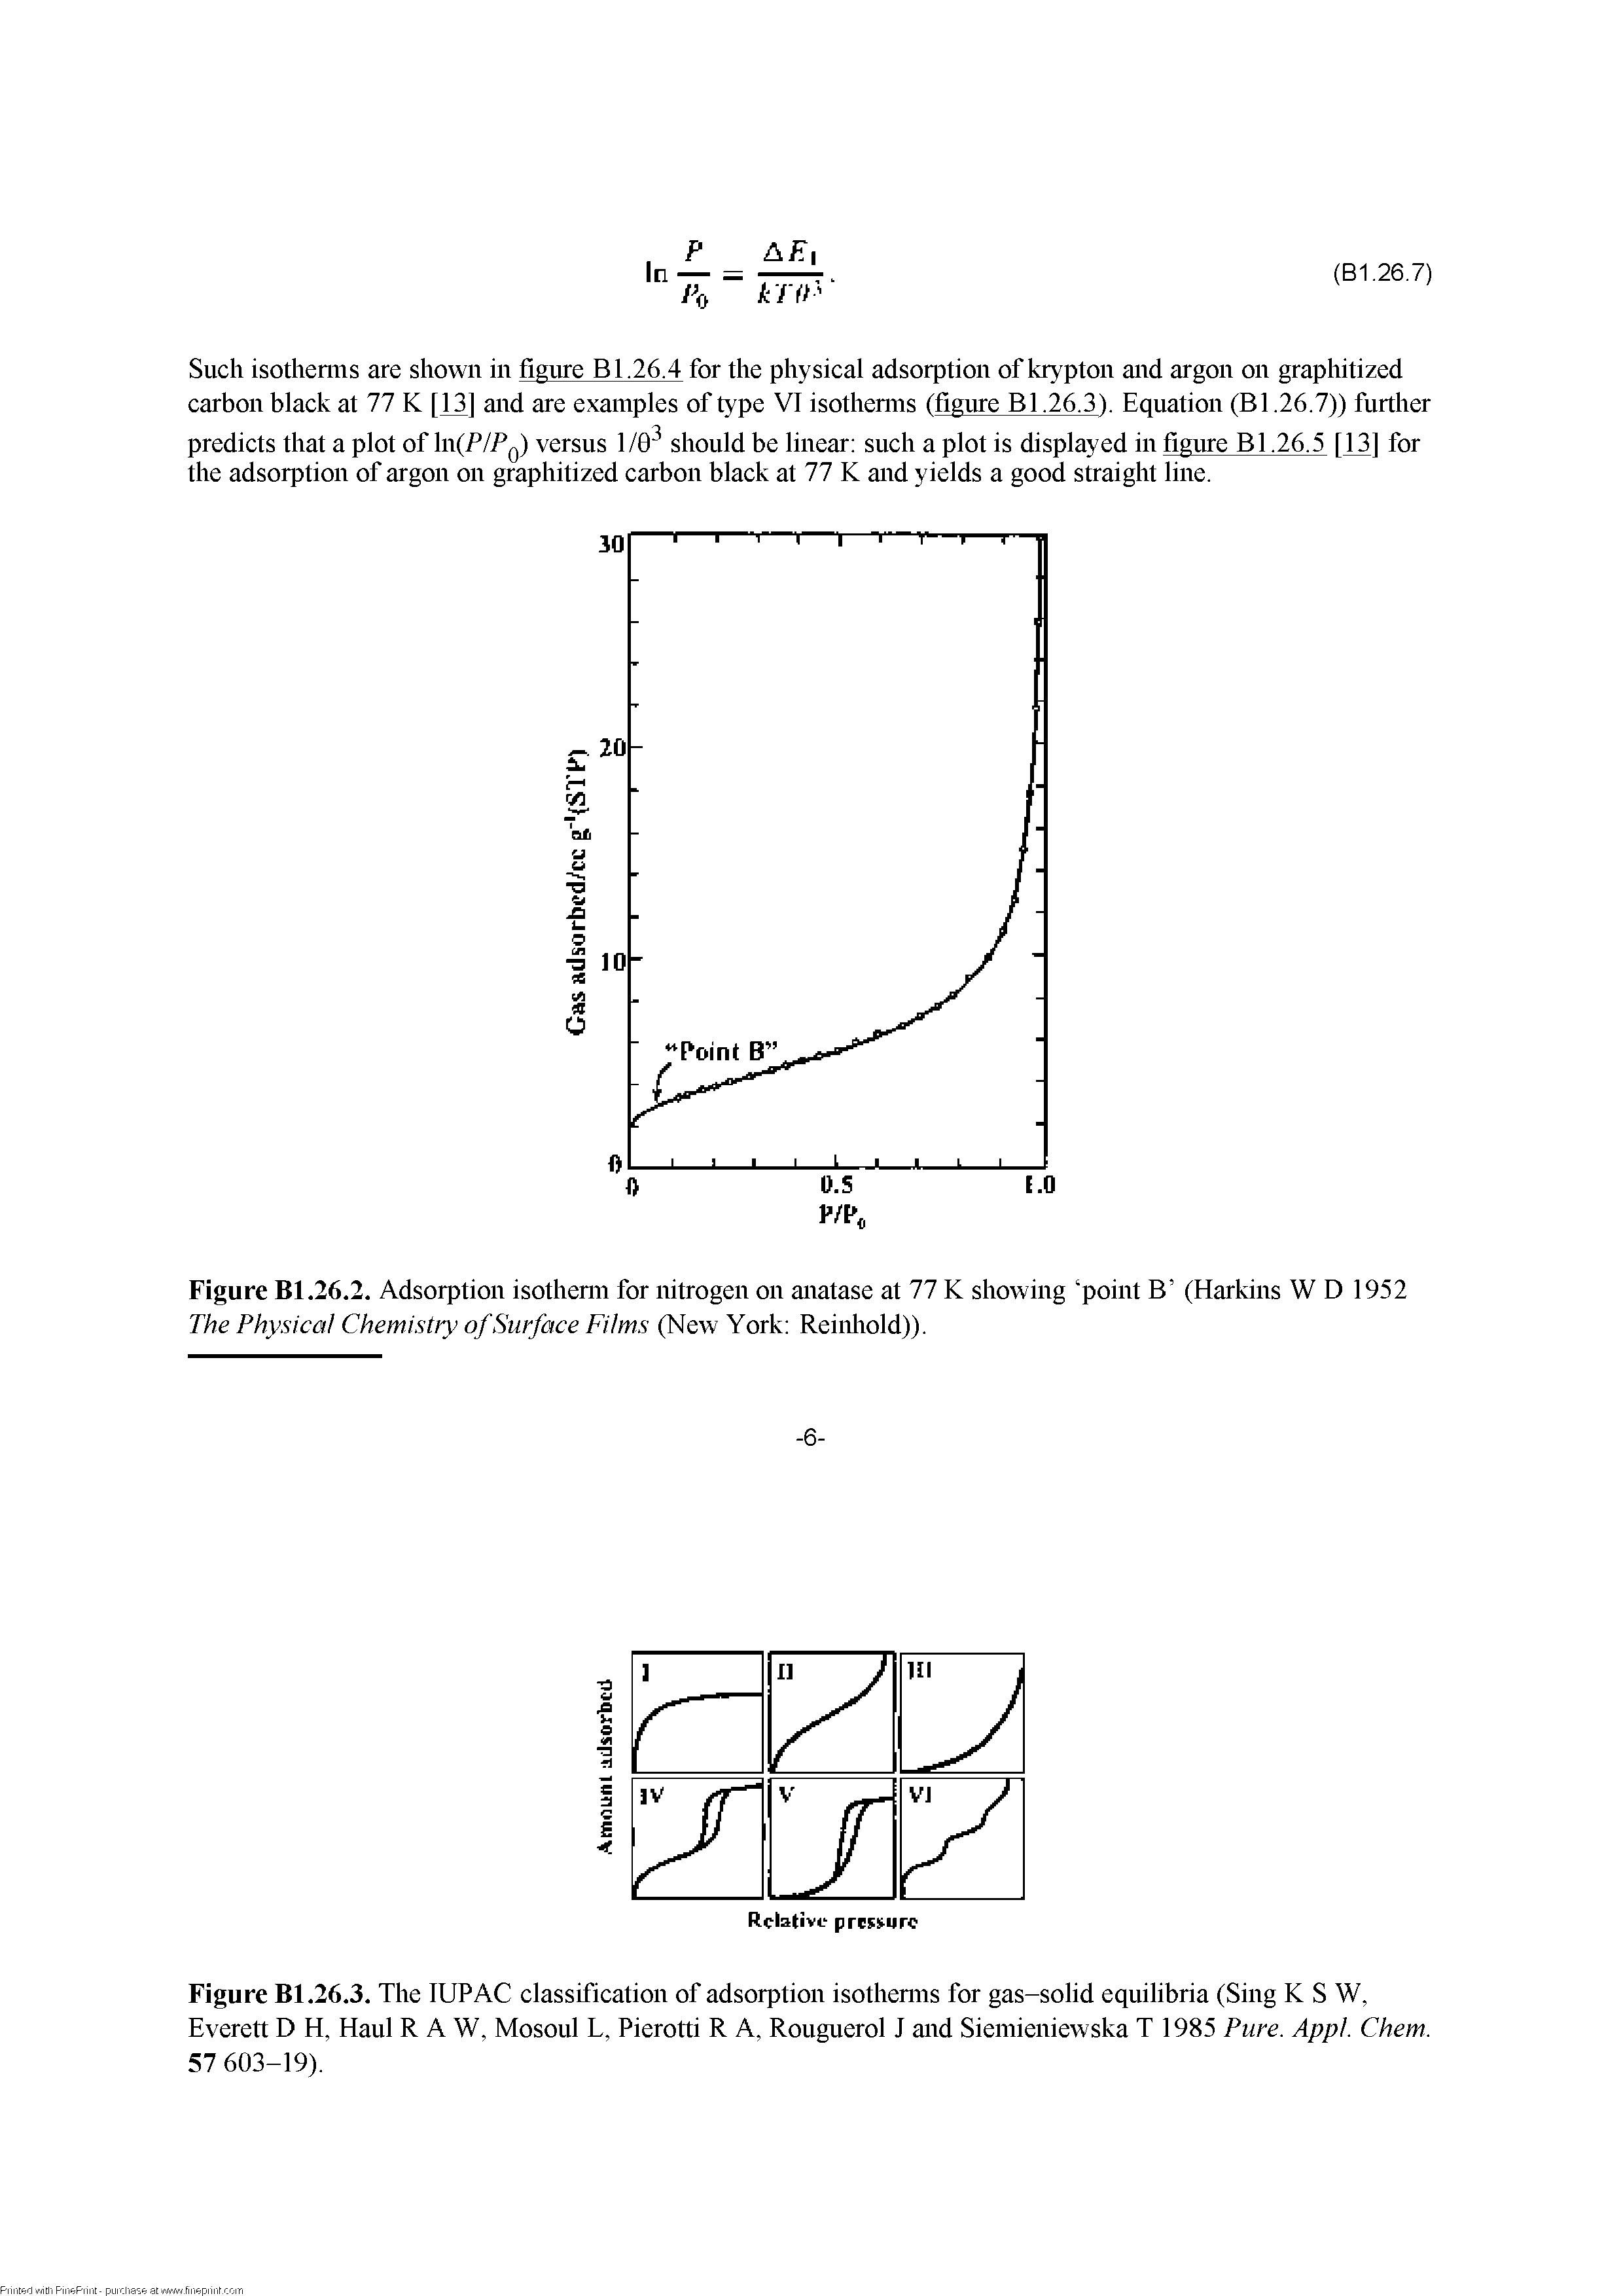 Figure Bl.26.2. Adsorption isothemi for nitrogen on anatase at 77 K showing point B (Harkins W D 1952 The Physical Chemistry of Surface Films (New York Reinliold)).